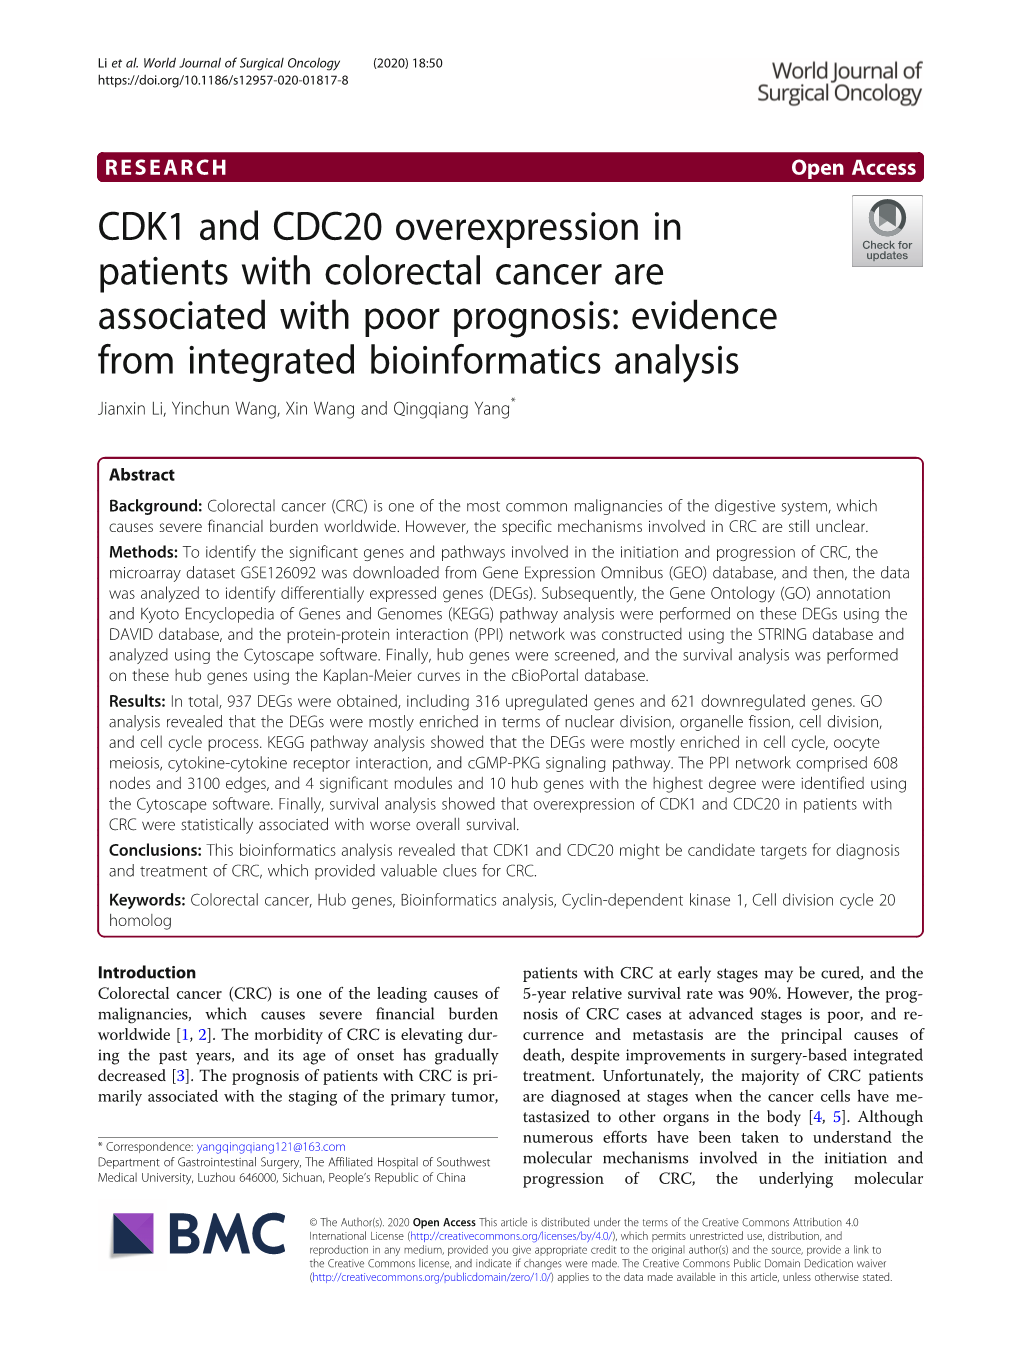 CDK1 and CDC20 Overexpression in Patients with Colorectal Cancer Are